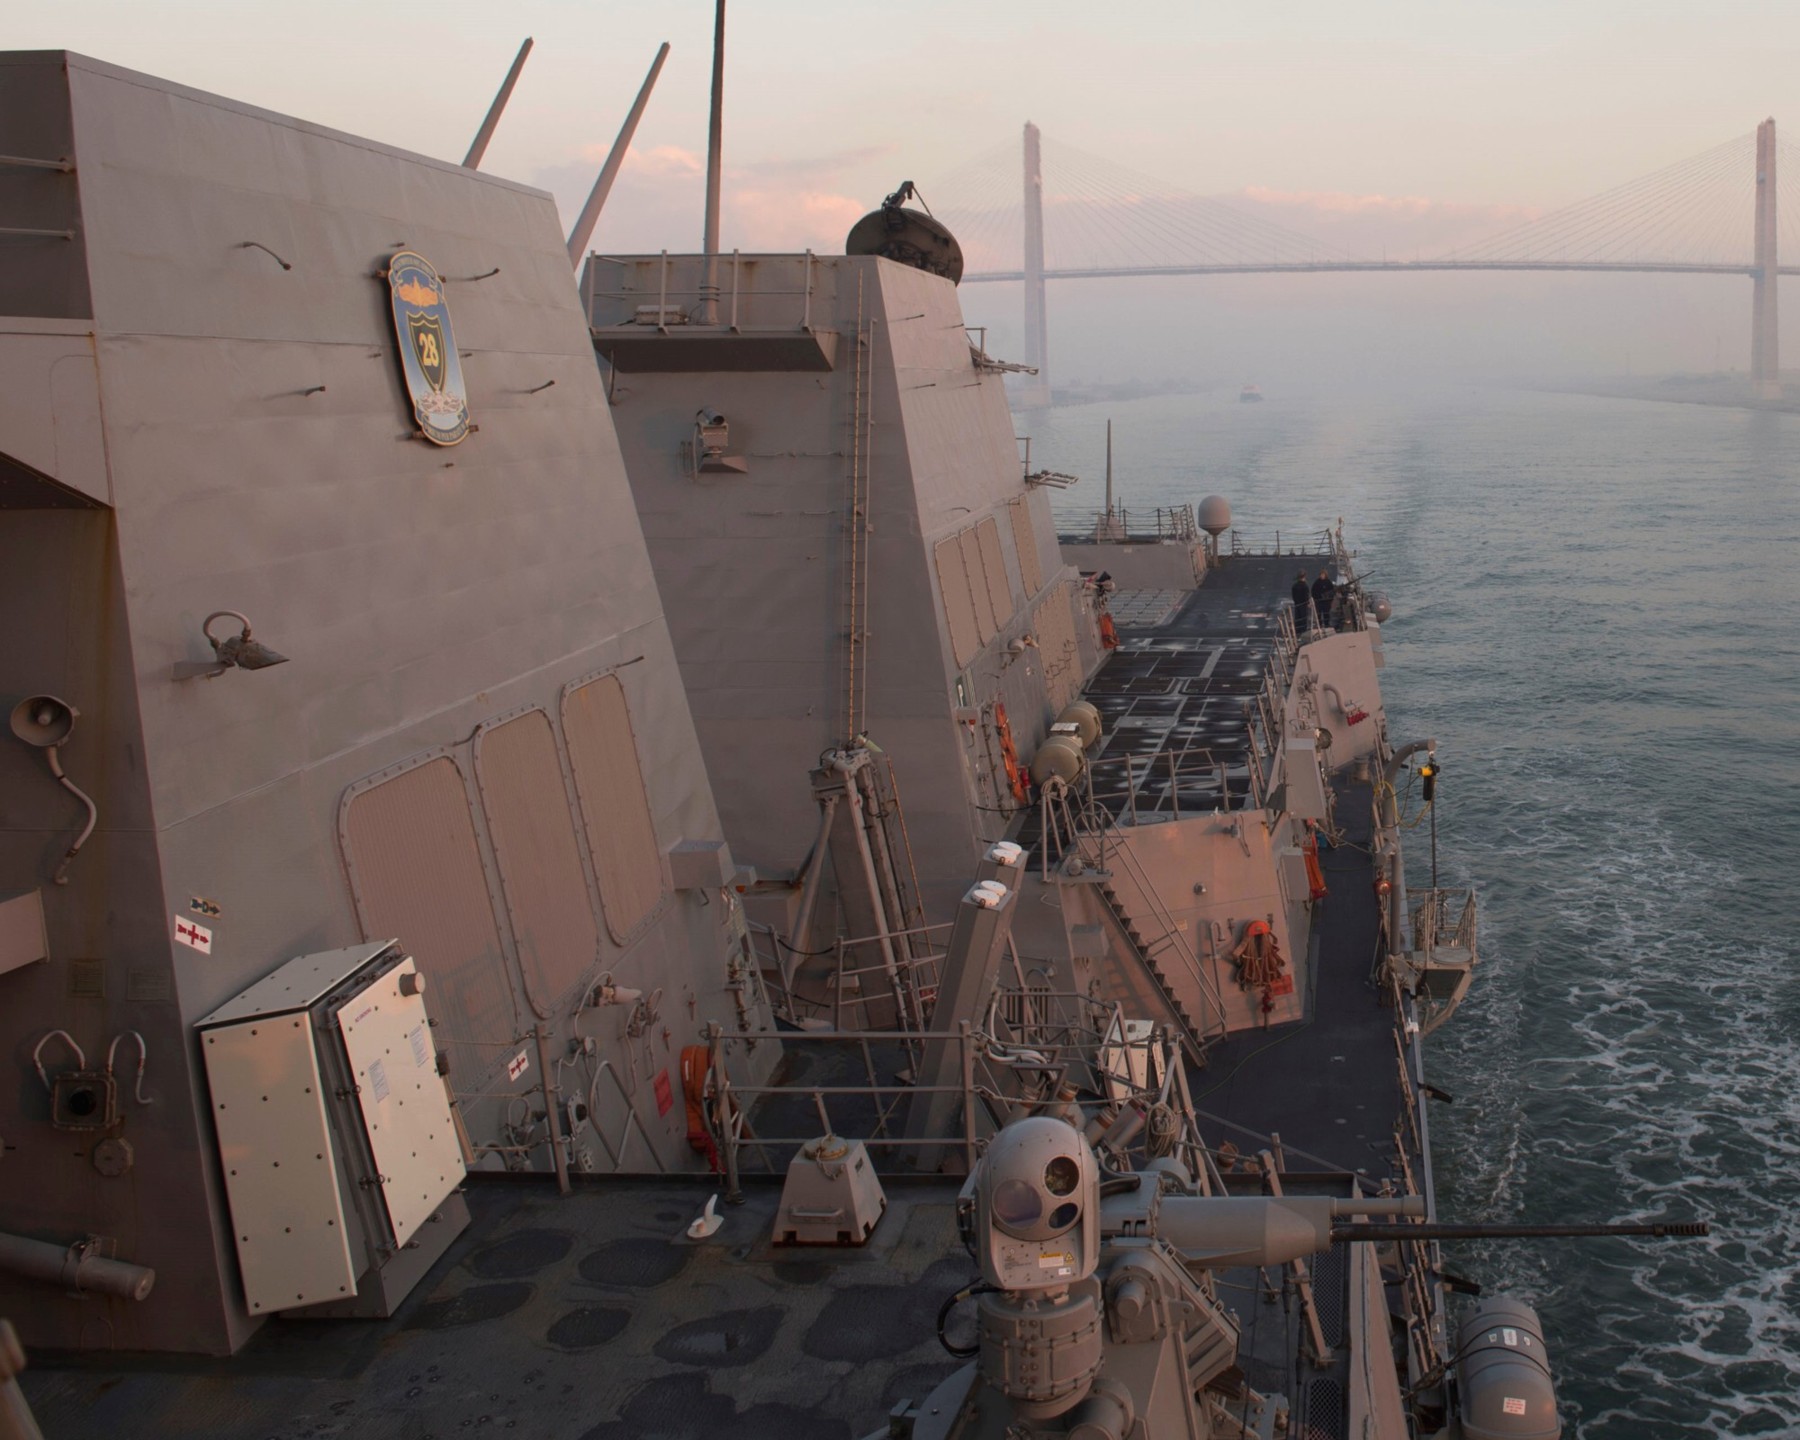 ddg-107 uss gravely arleigh burke class guided missile destroyer aegis us navy suez canal 07p